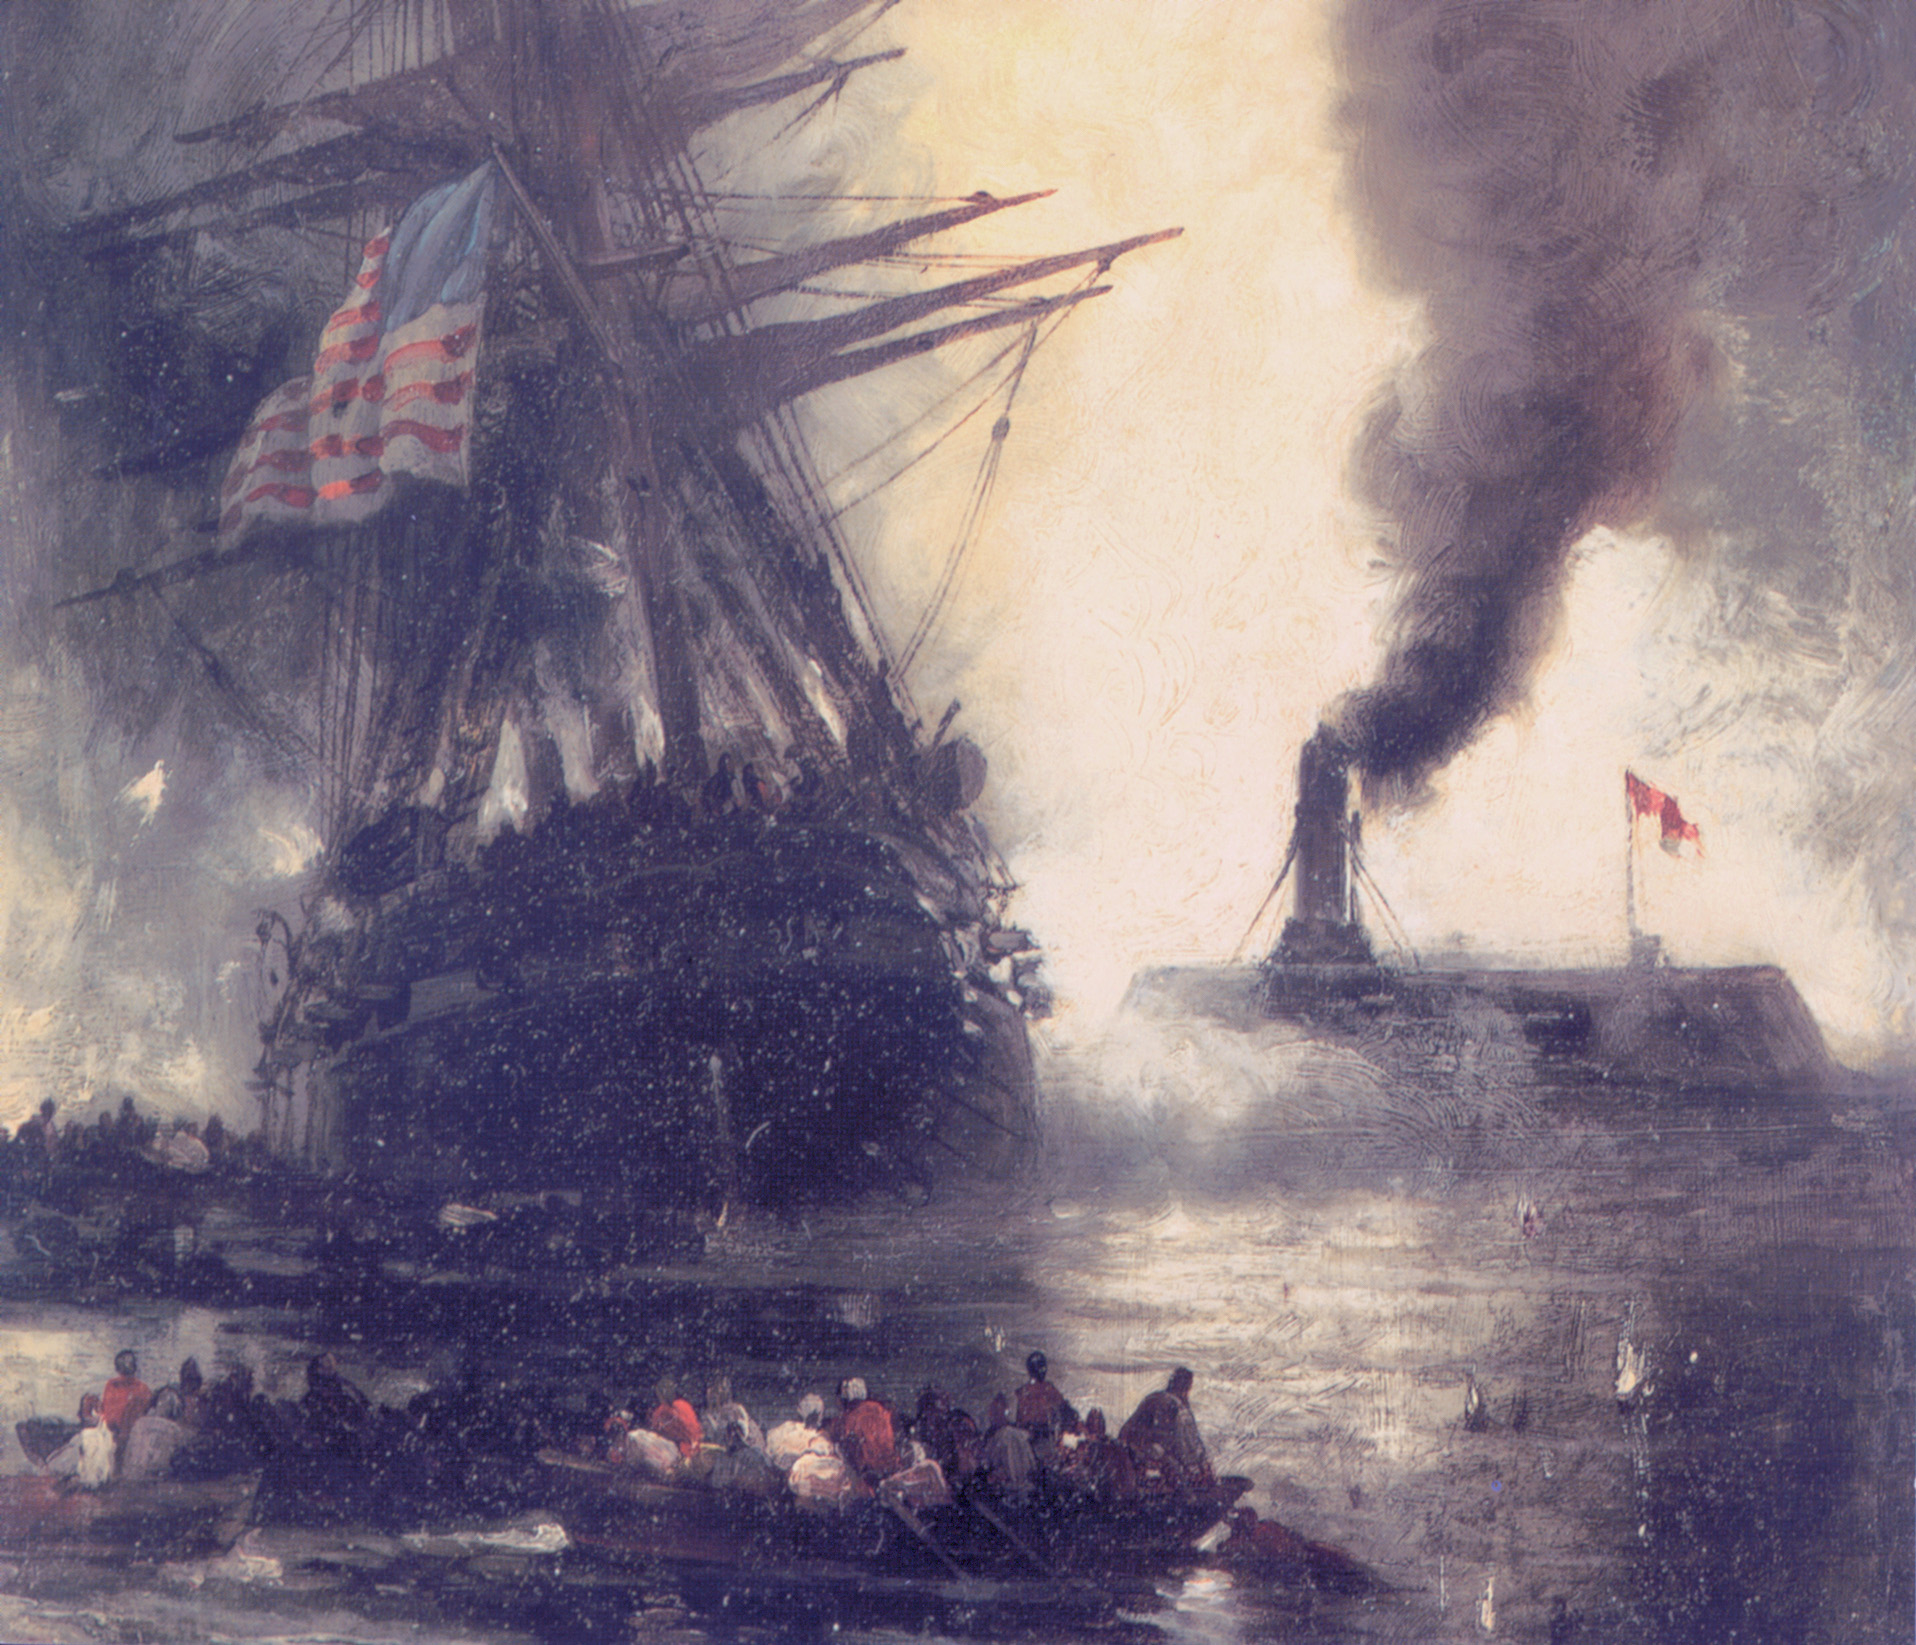 The CSS Virginia blasts the USS Cumberland. John Wood was a major factor in the Virginia’s  success.  Throughout the war he used scarce resources to advantage for the Confederate cause.  